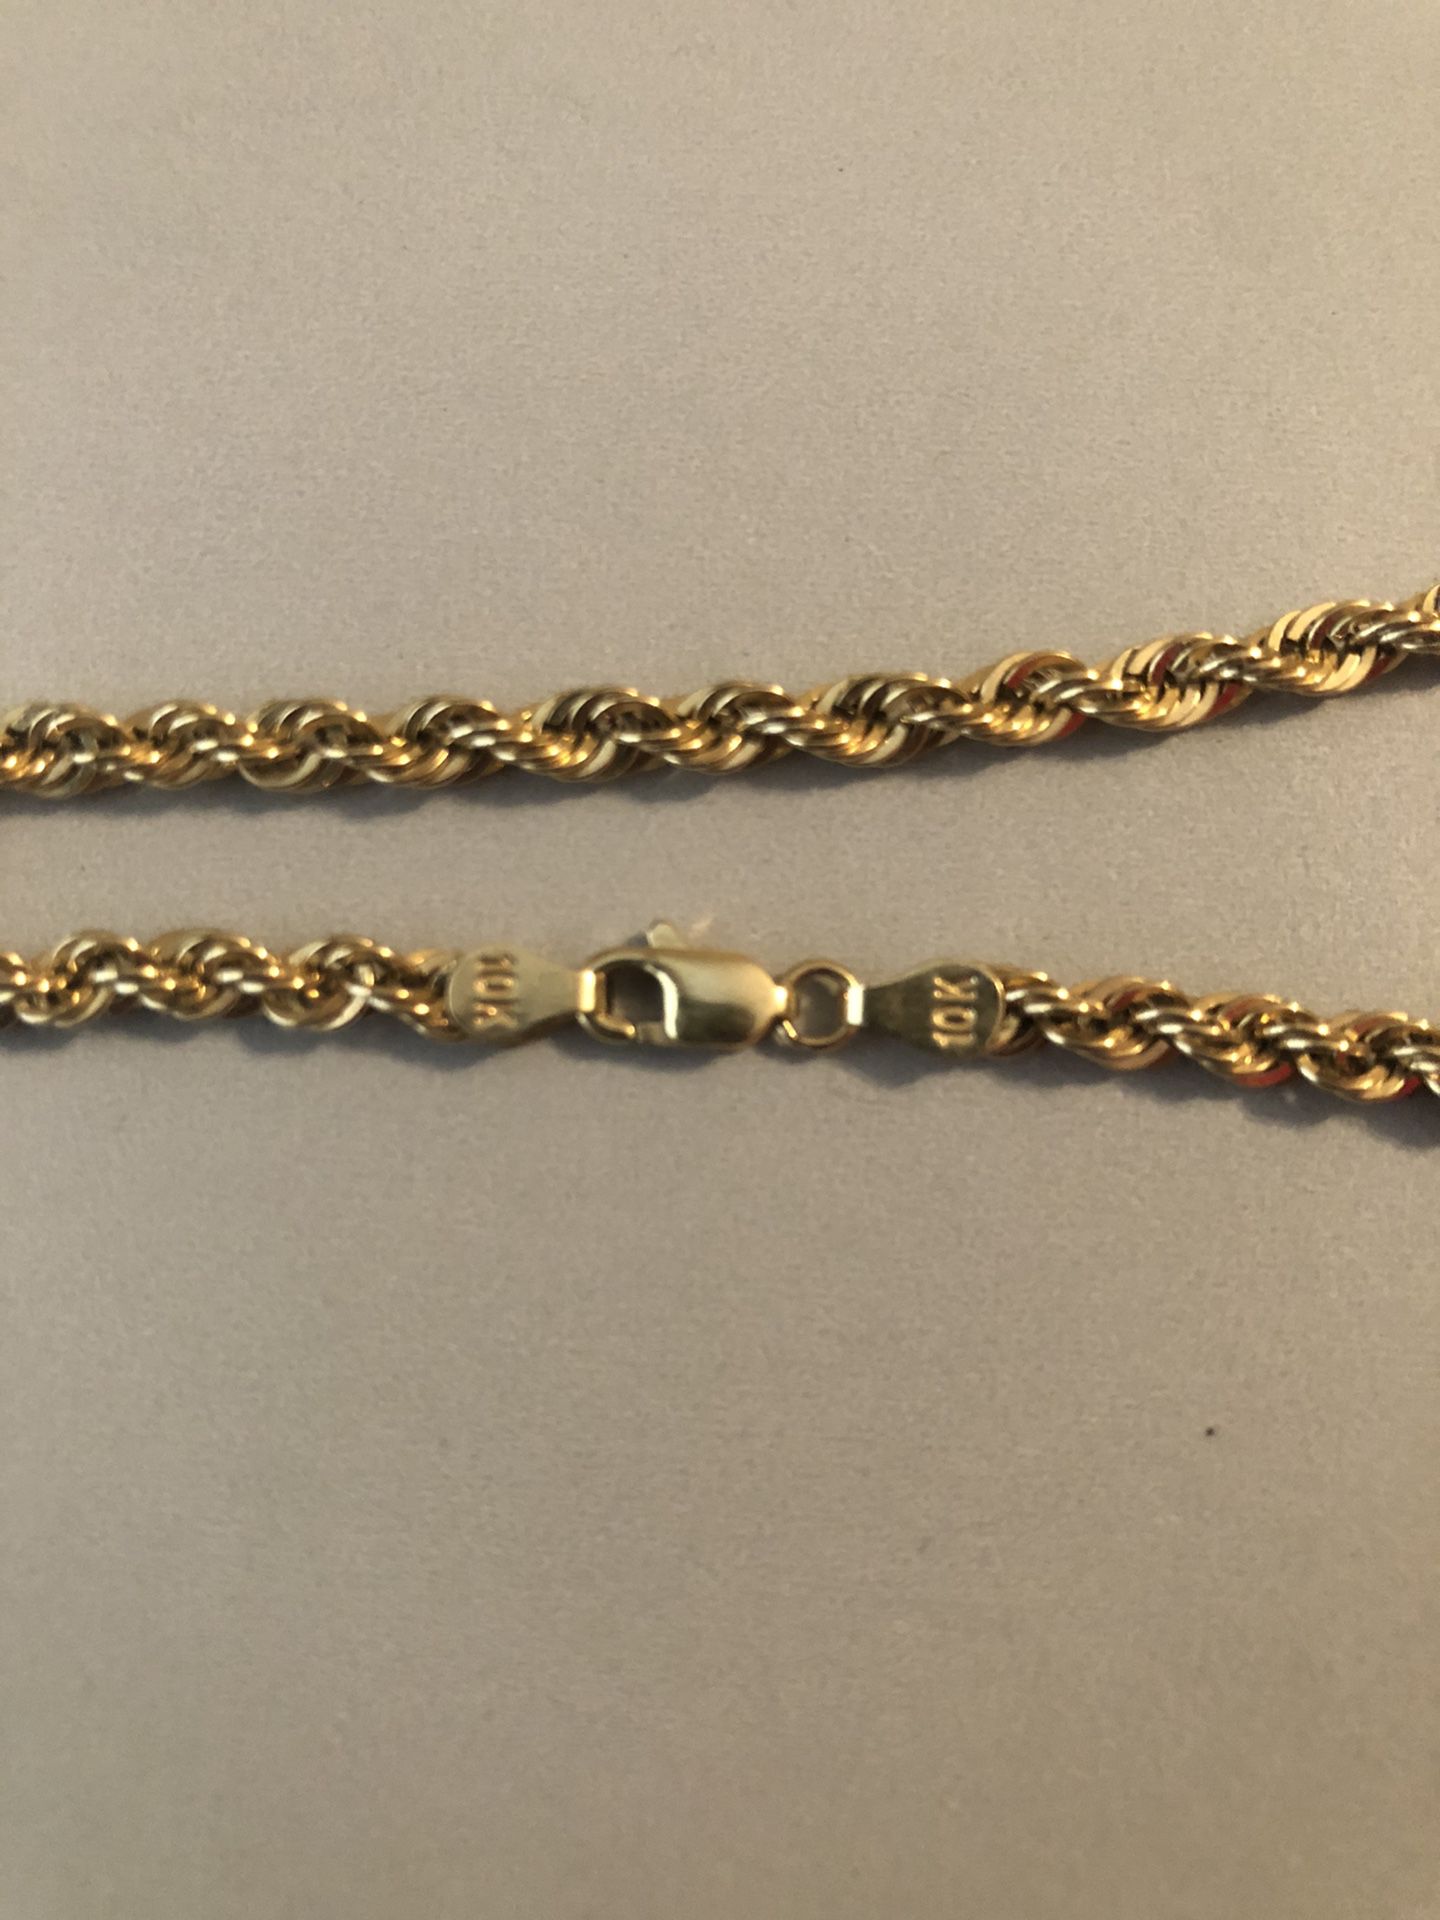 10k gold chain 100% authentic